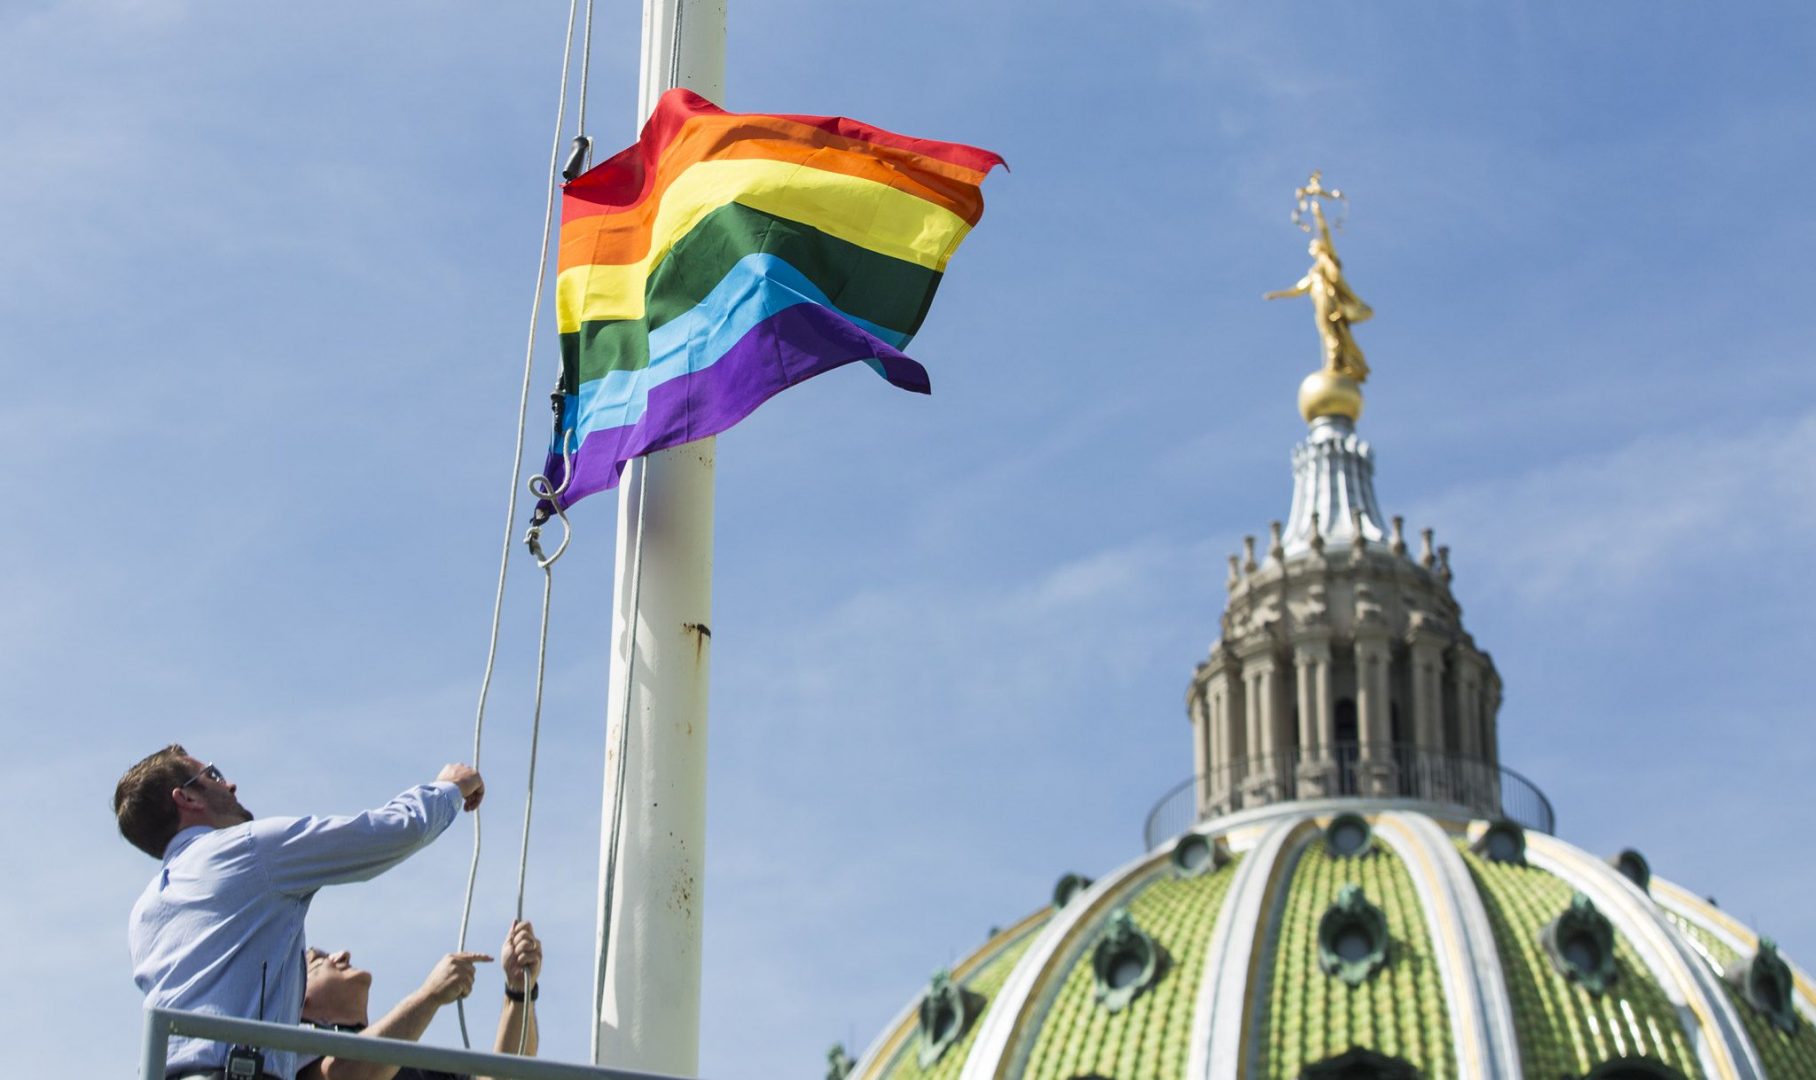 The LGBTQ Pride flag flies at the Capitol building in Harrisburg.